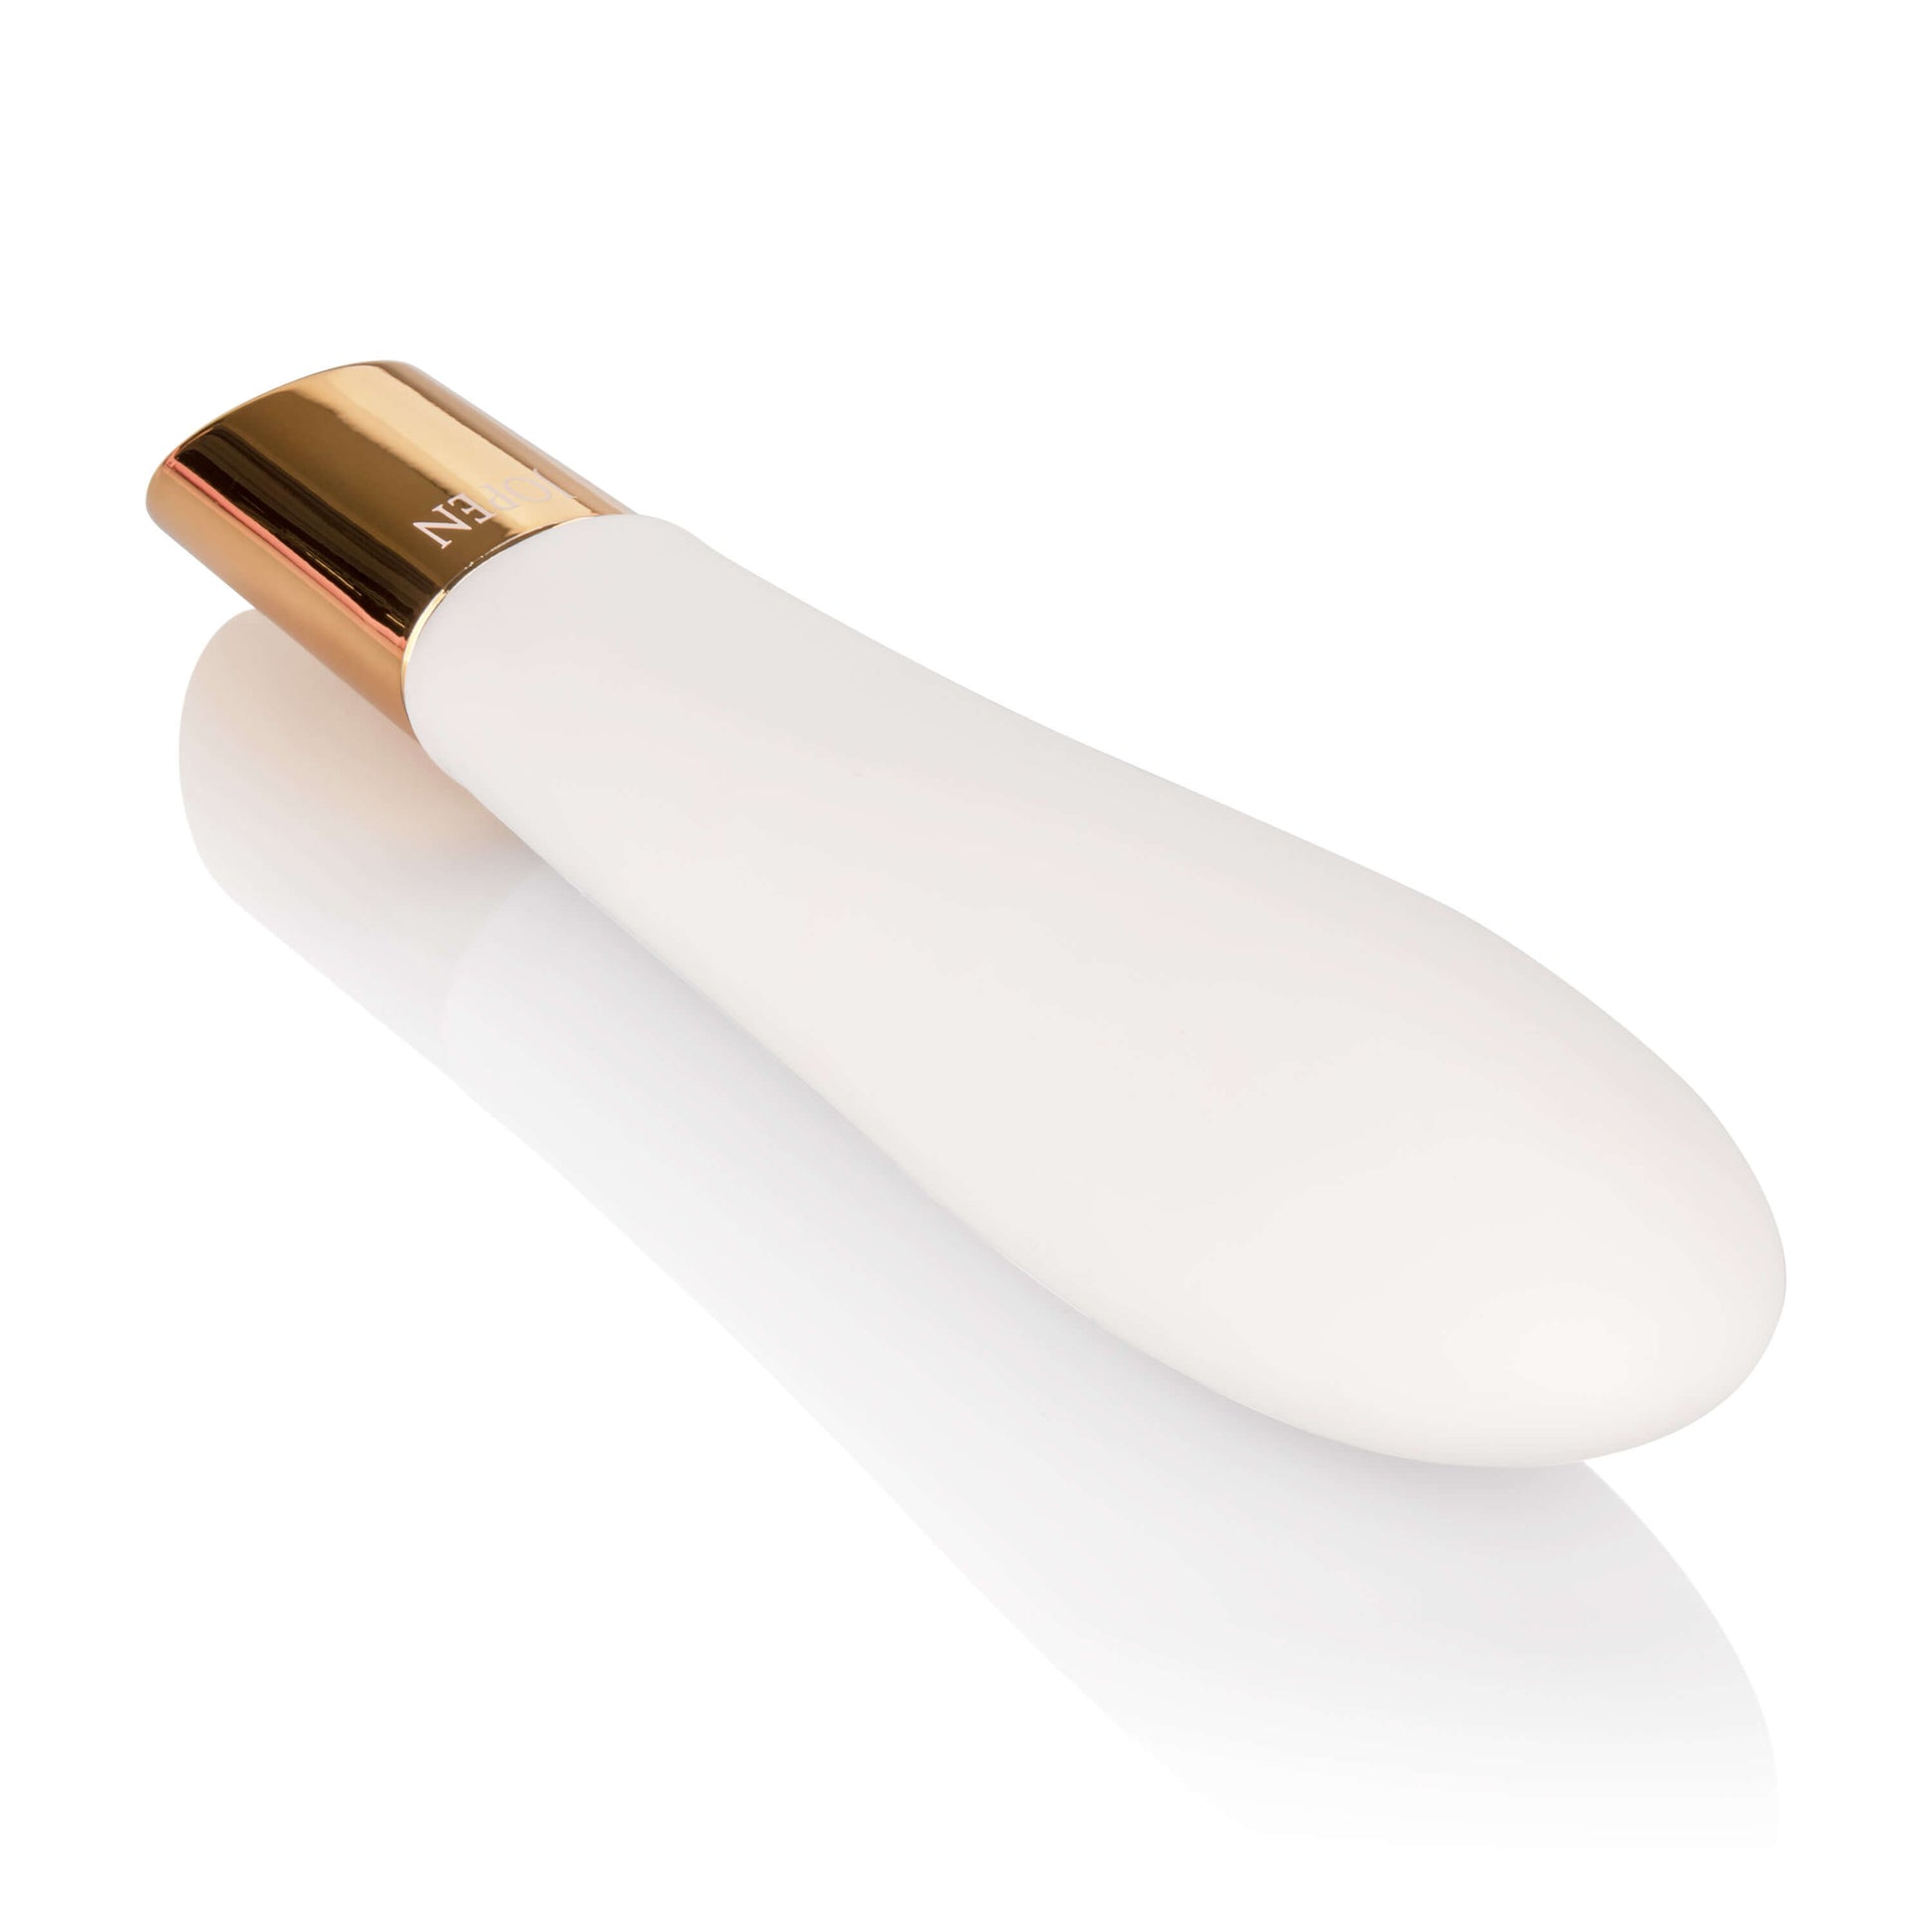 Callie Vibrating Wand - Jopen - The Bigger O - online sex toy shop USA, Canada & UK shipping available